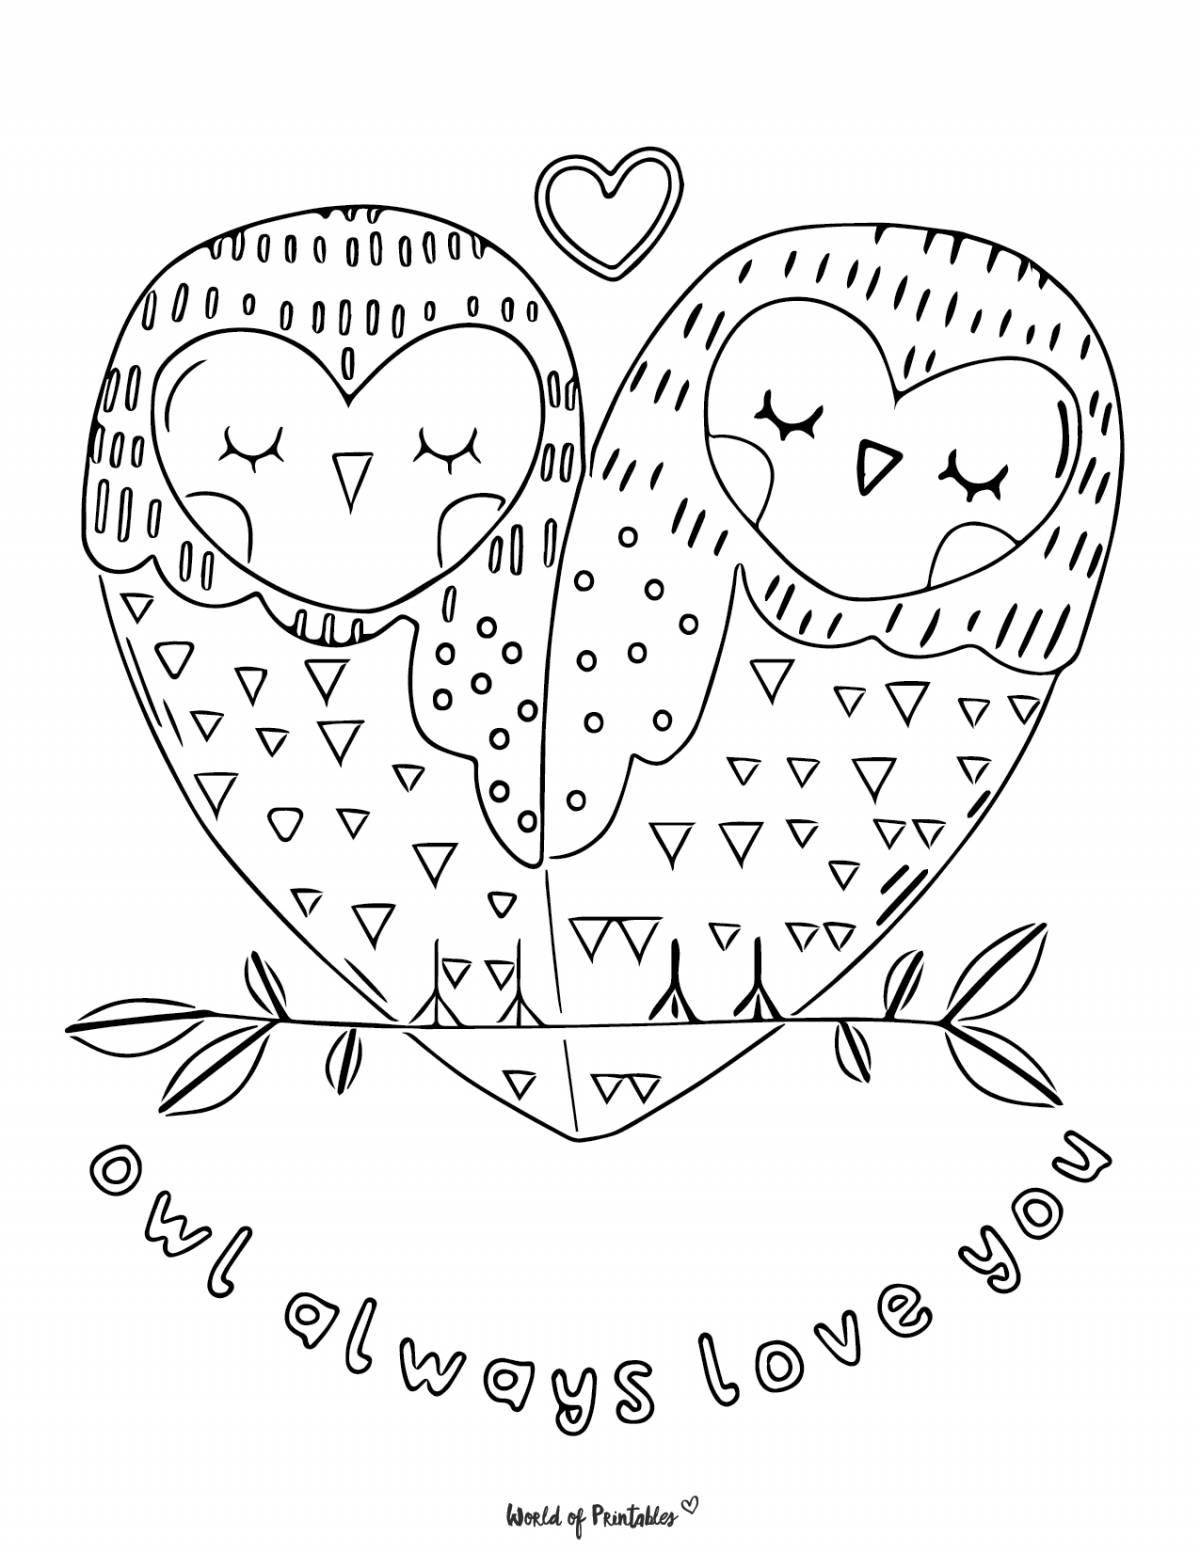 Inspirational valentines day coloring book